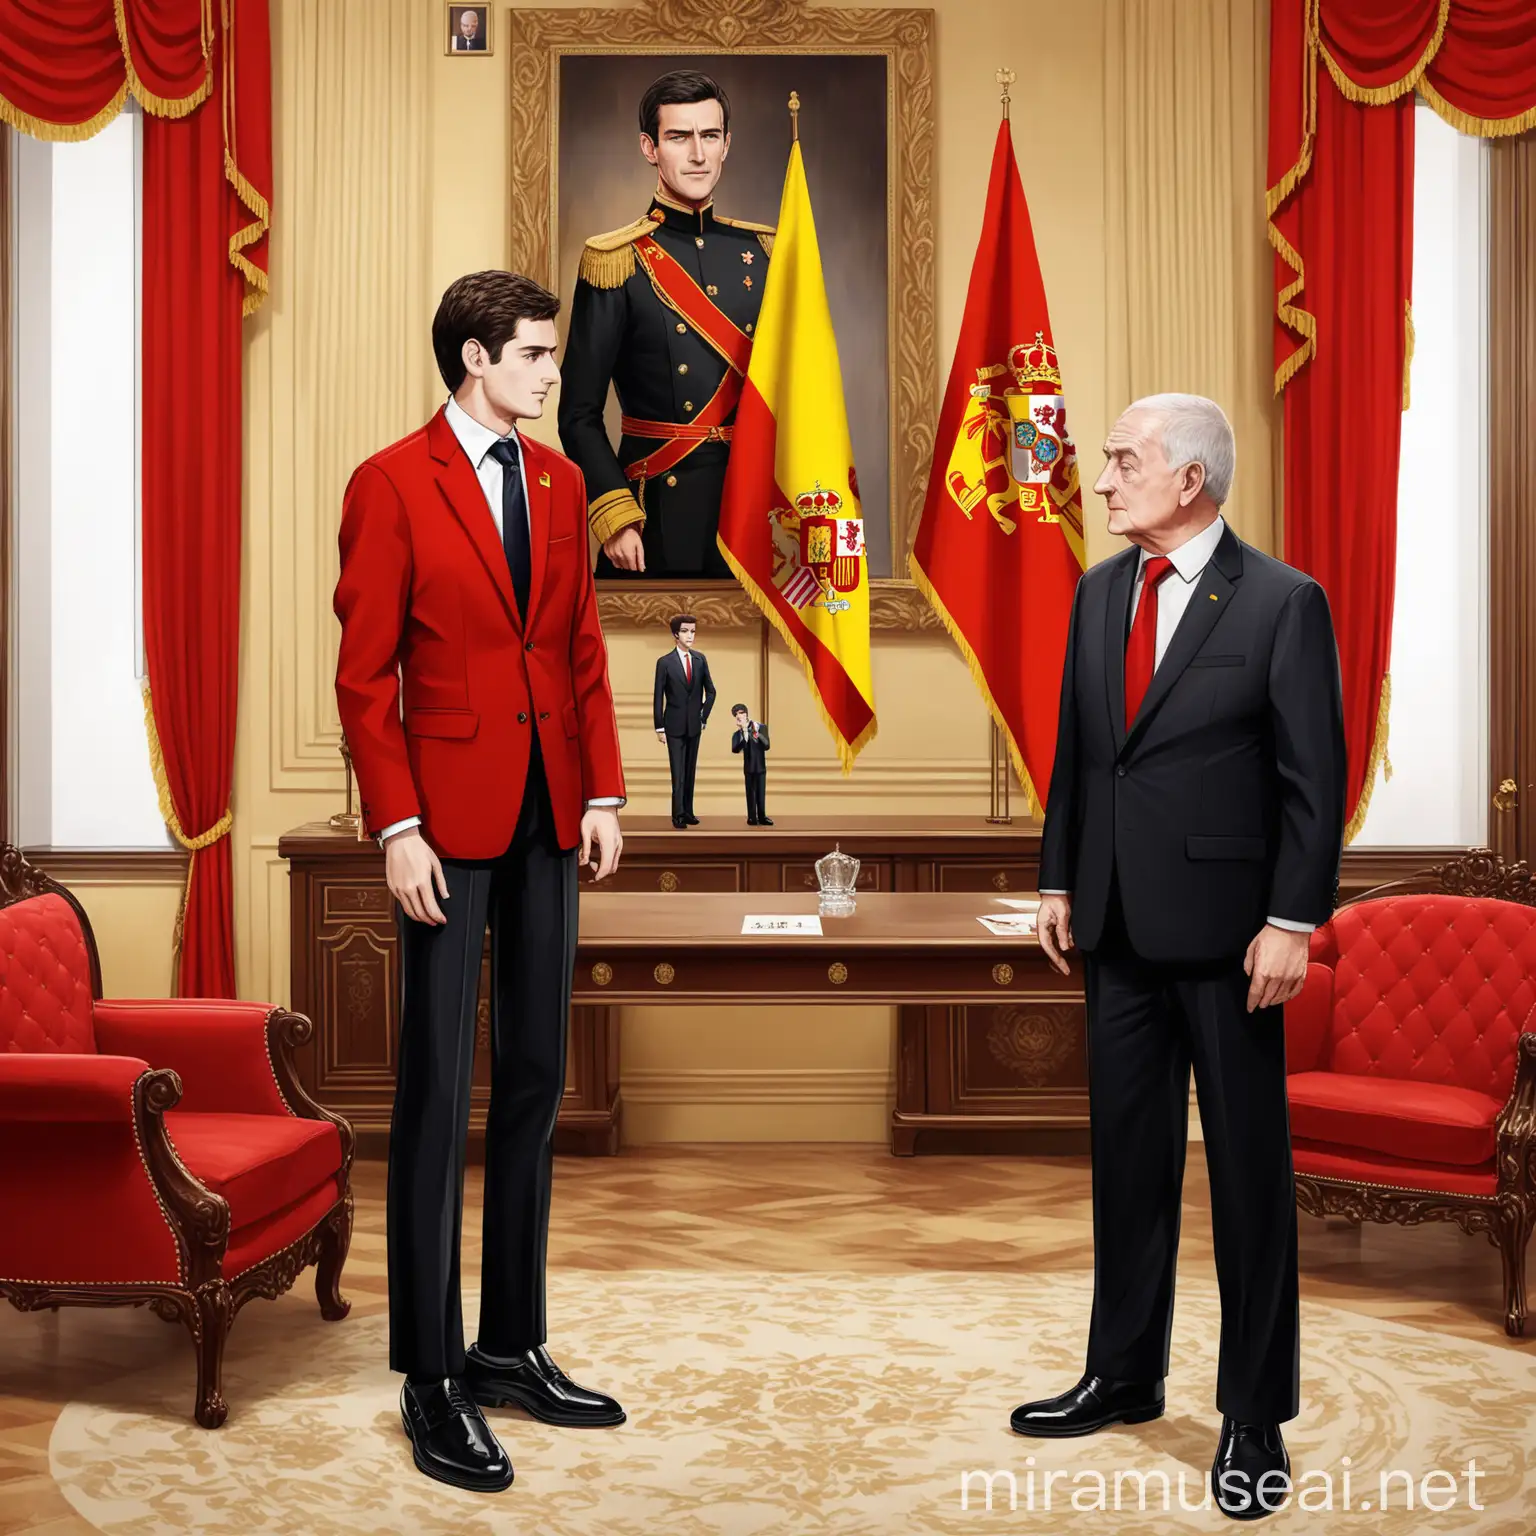 The background is the office of the royal palace.
The flag of Spain hangs on the wall.
A 20-year-old handsome man and a 50-year-old president have a conversation.
The 20-year-old handsome man wore a red suit set and black shoes.
The 50-year-old president wore a black suit set and a yellow tie.